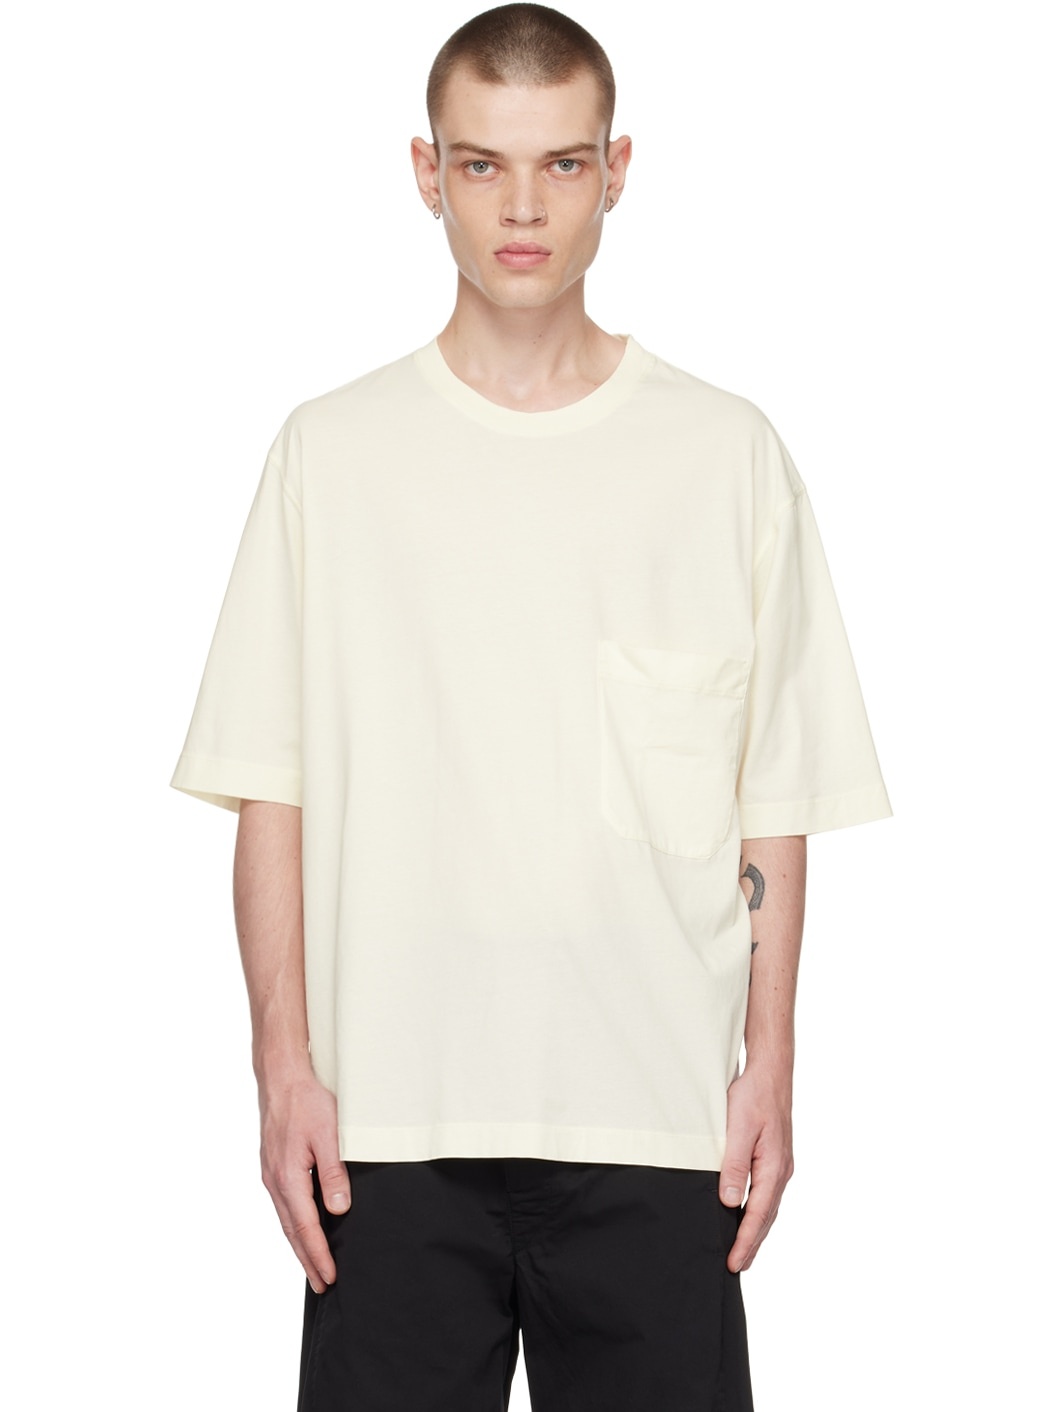 Off-White Garment-Dyed T-Shirt - 1